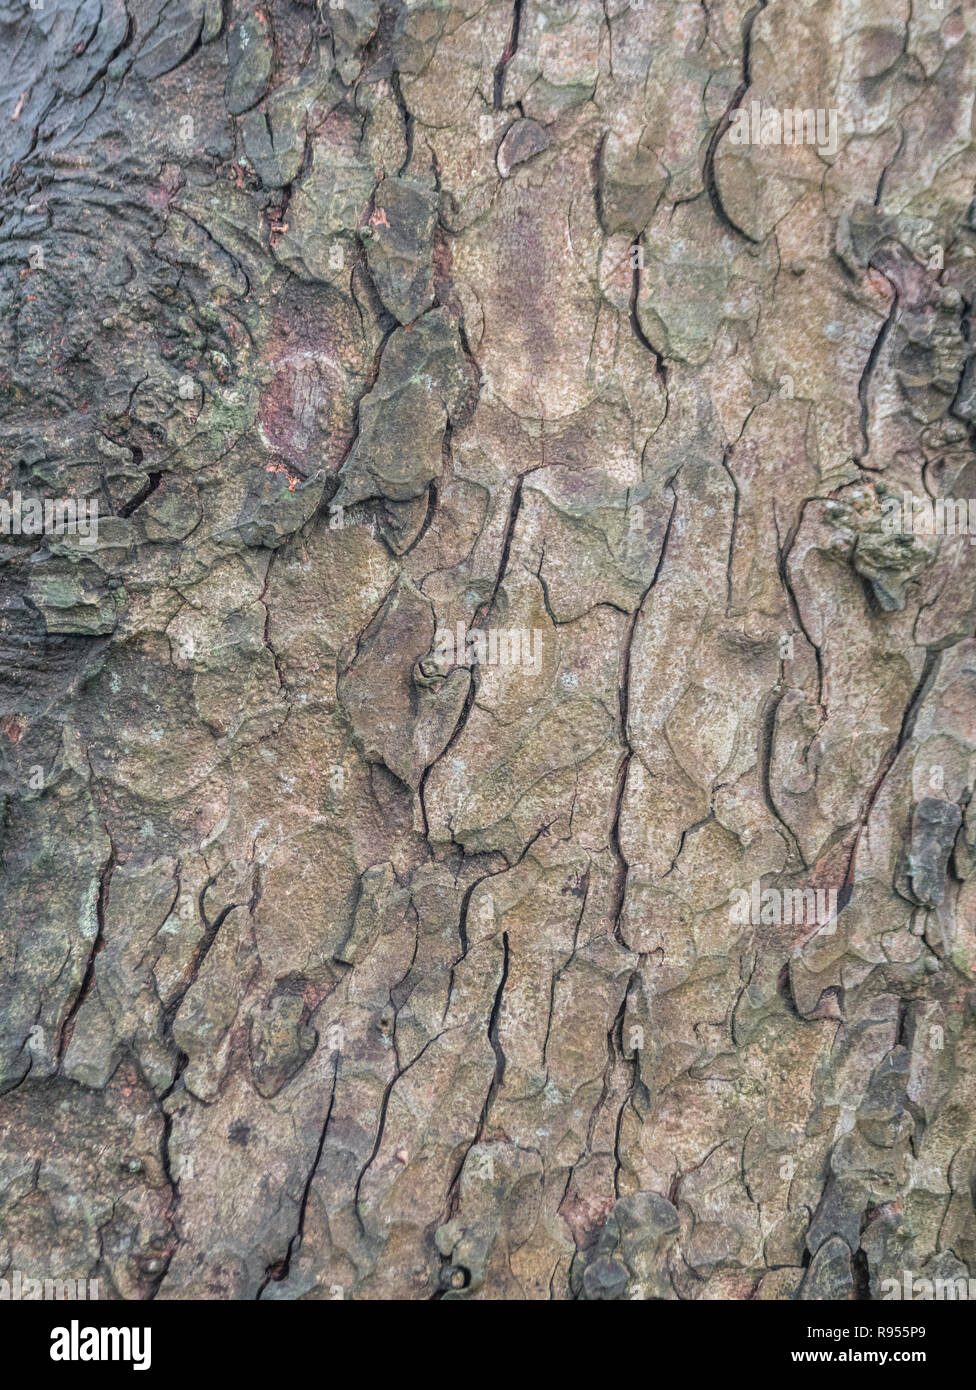 Close detail of the autumnal bark (after rain shower) of a Horse-Chestnut / Aesculus hippocastanum tree trunk. Tree bark close up. Stock Photo